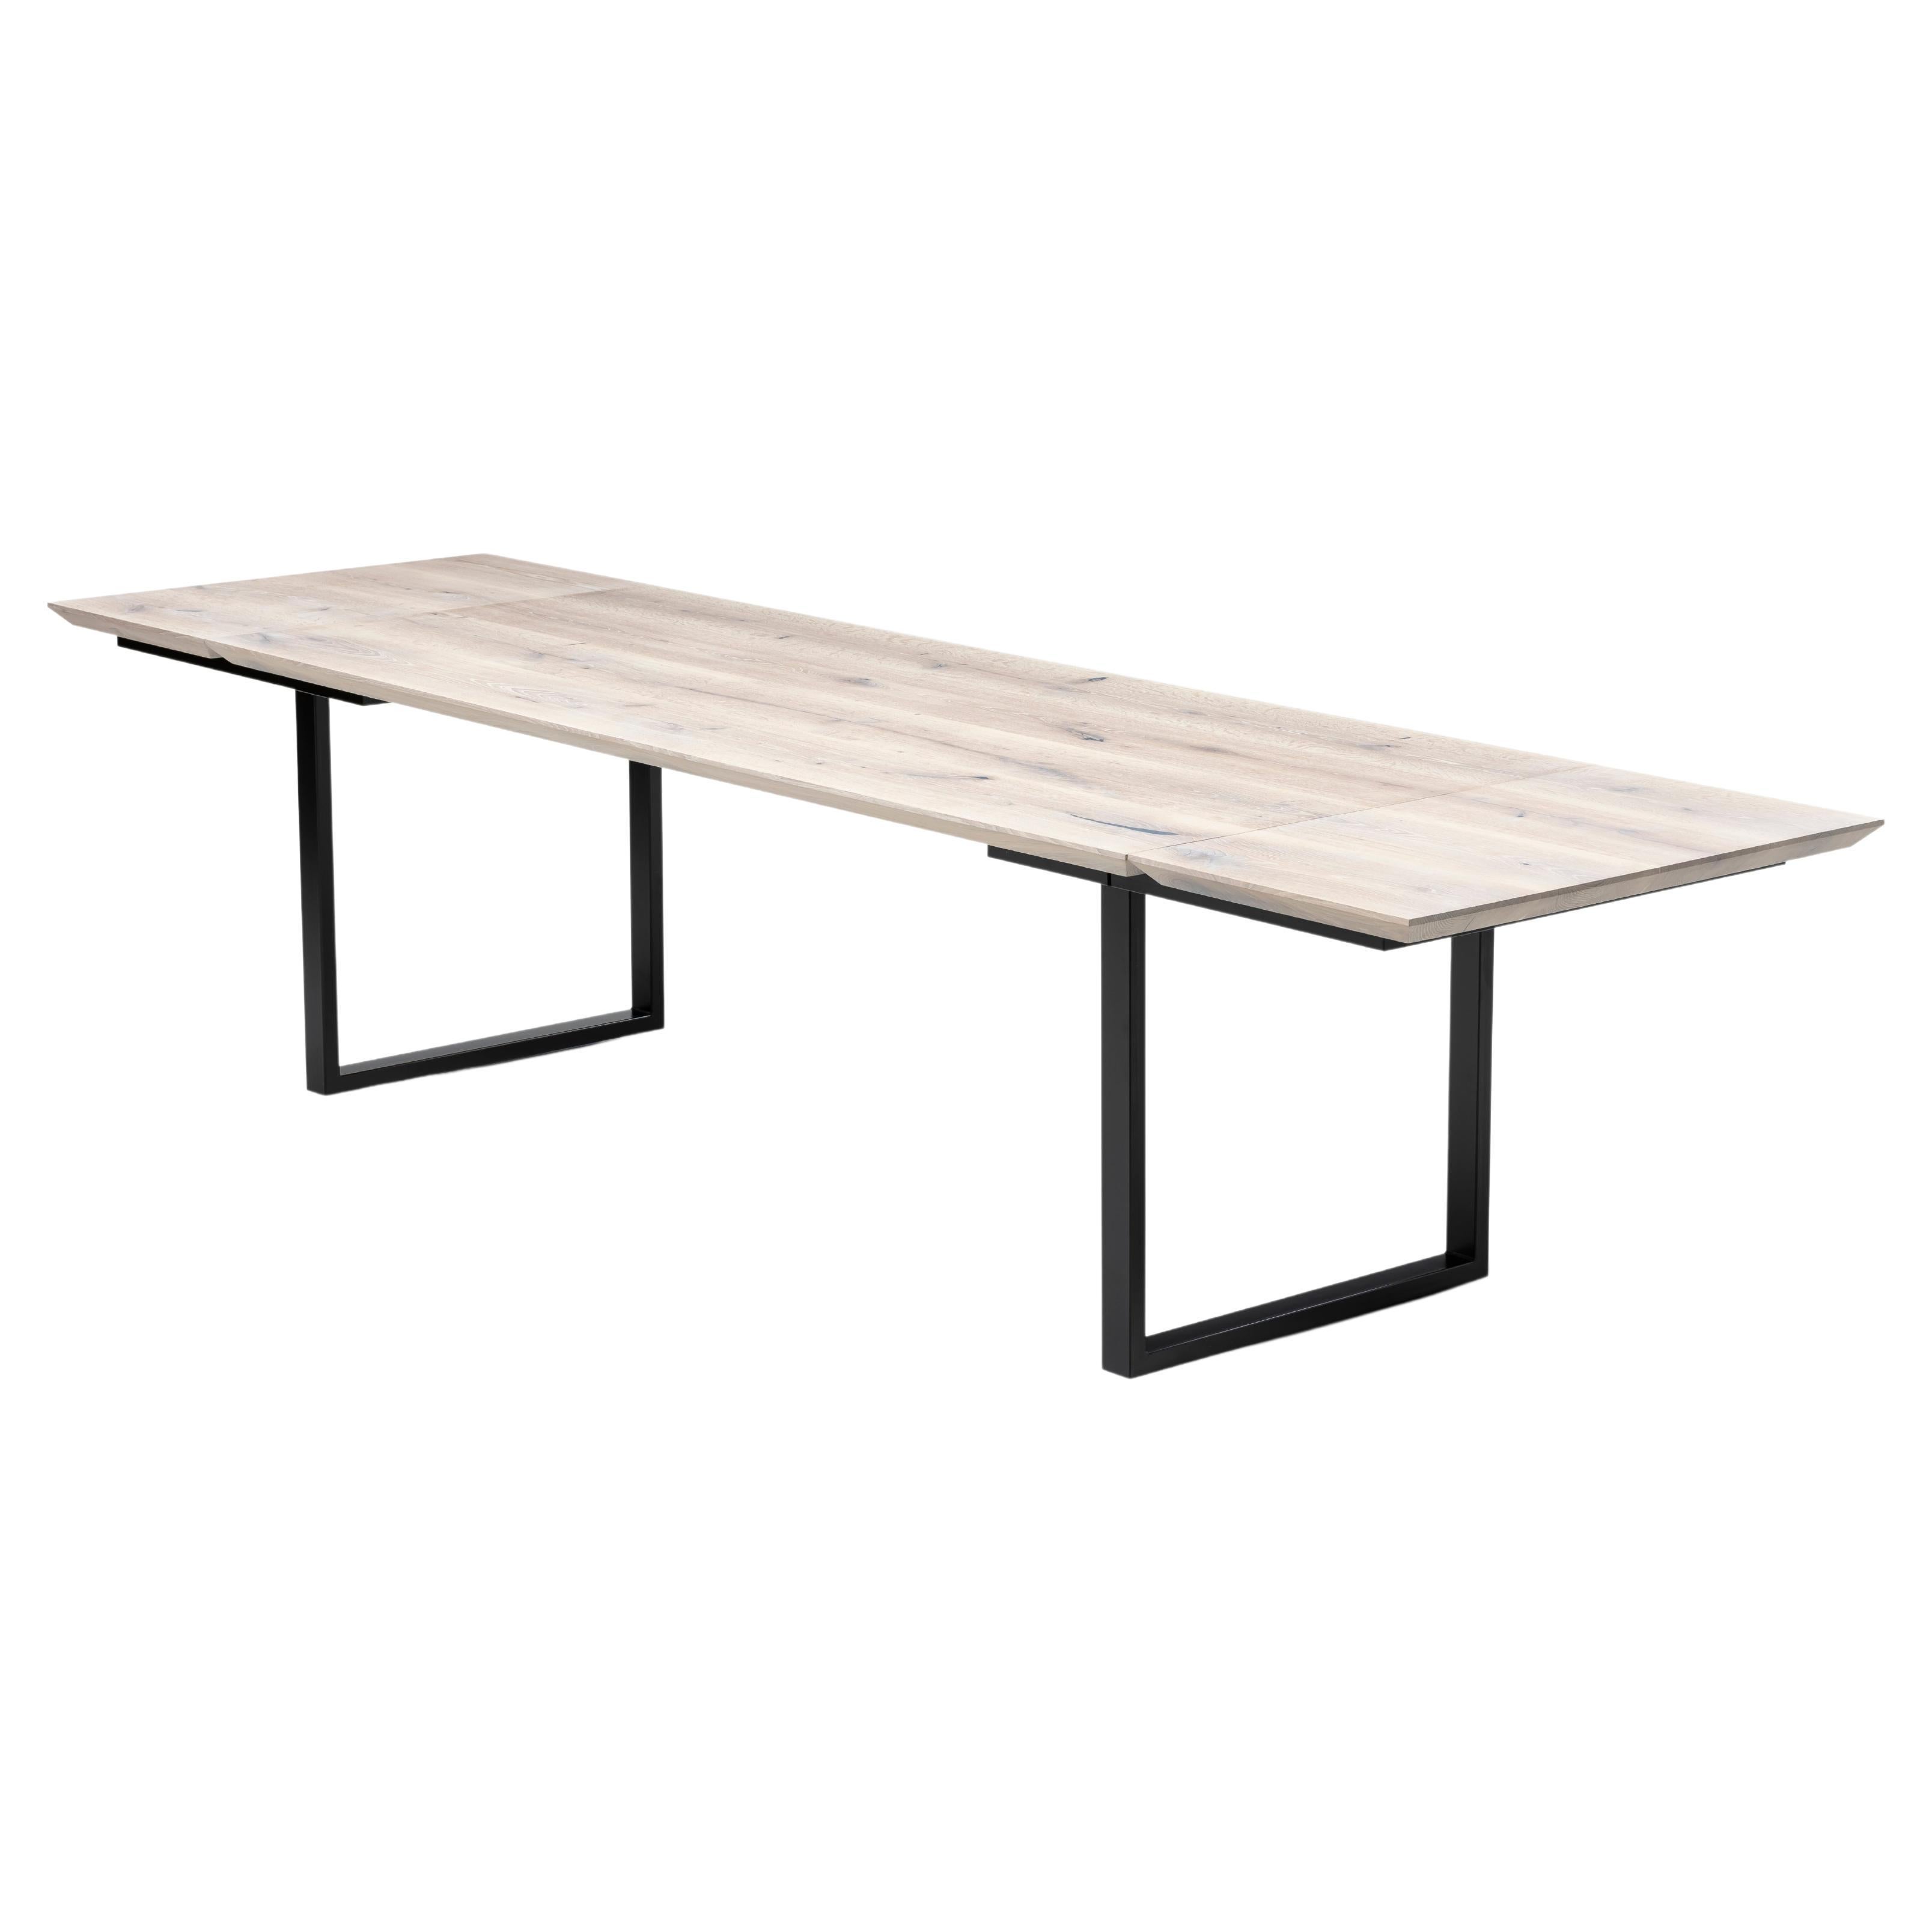 Plank Dining Table, Solid Oak, Cotton For Sale